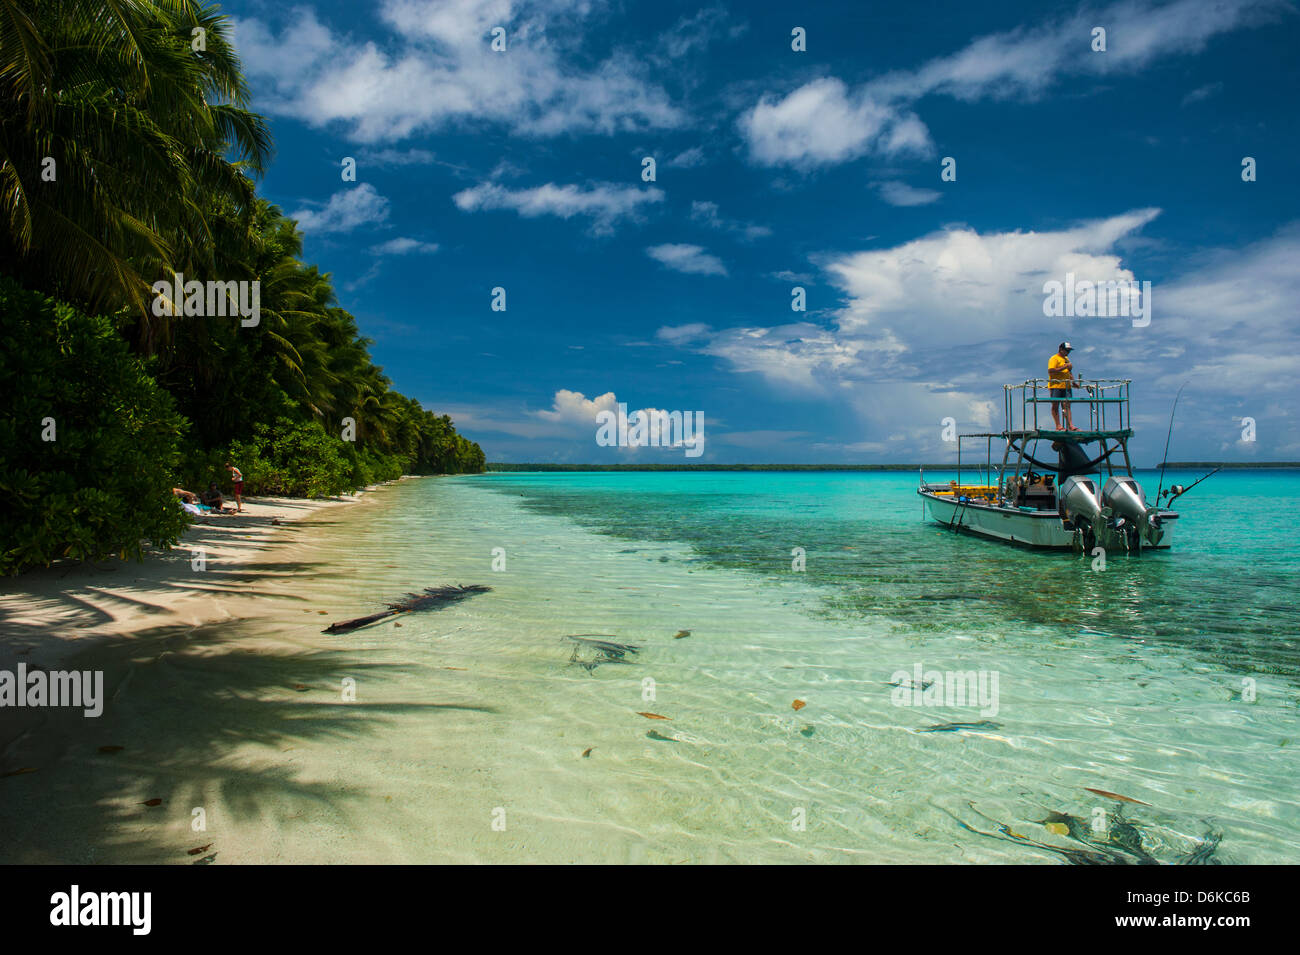 Little motor boat in the turquoise waters of the Ant Atoll, Pohnpei, Micronesia, Pacific Stock Photo